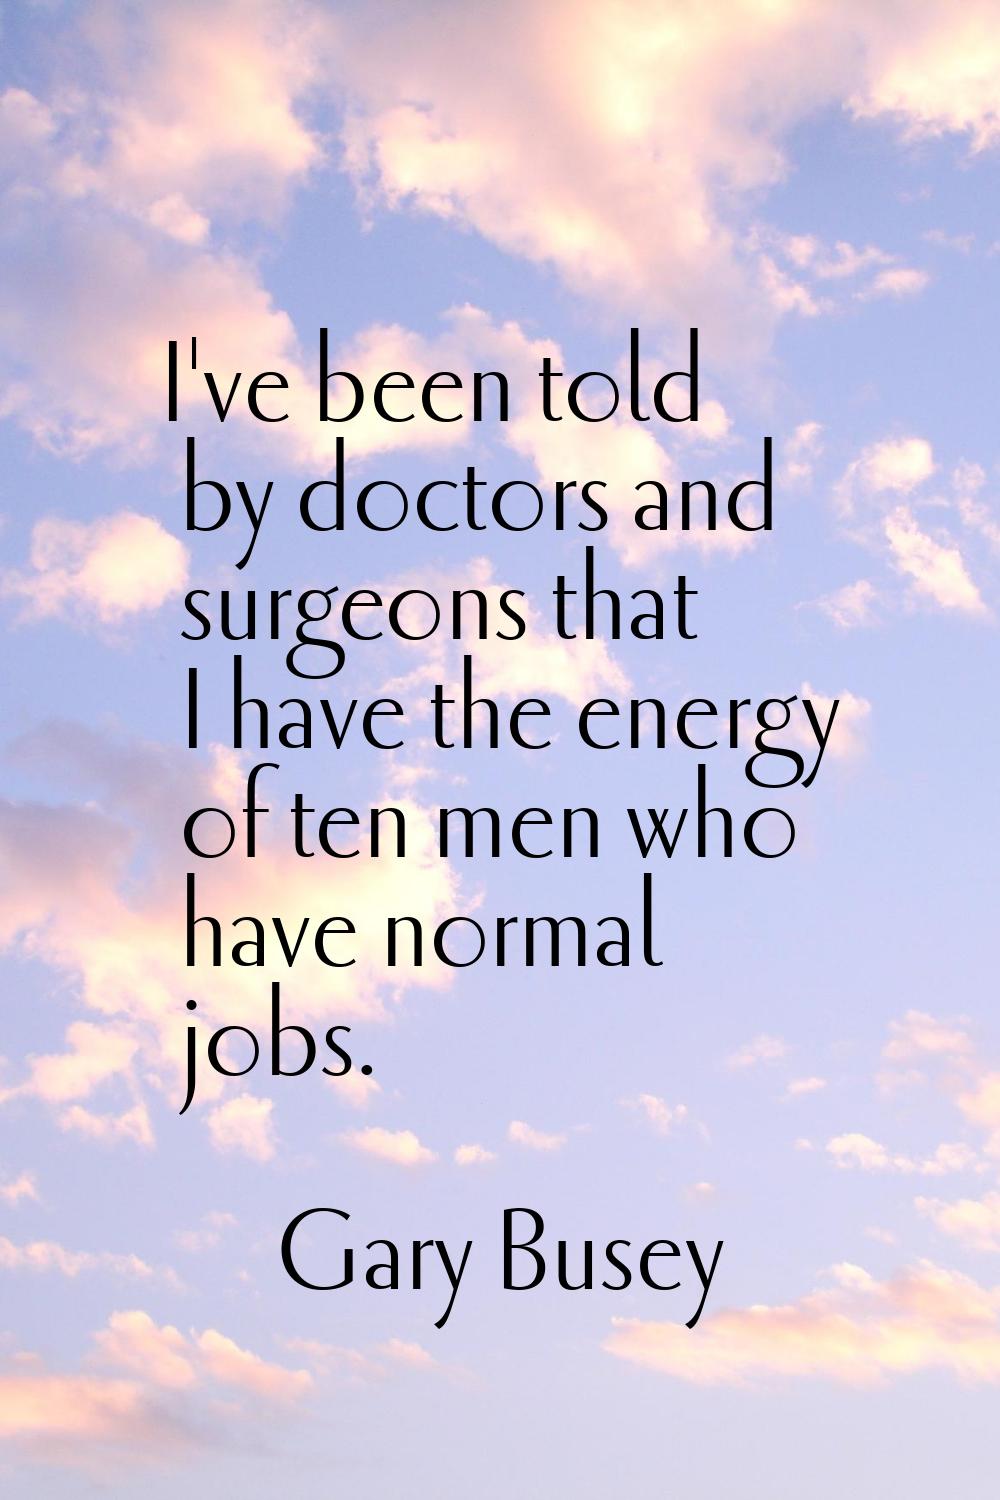 I've been told by doctors and surgeons that I have the energy of ten men who have normal jobs.